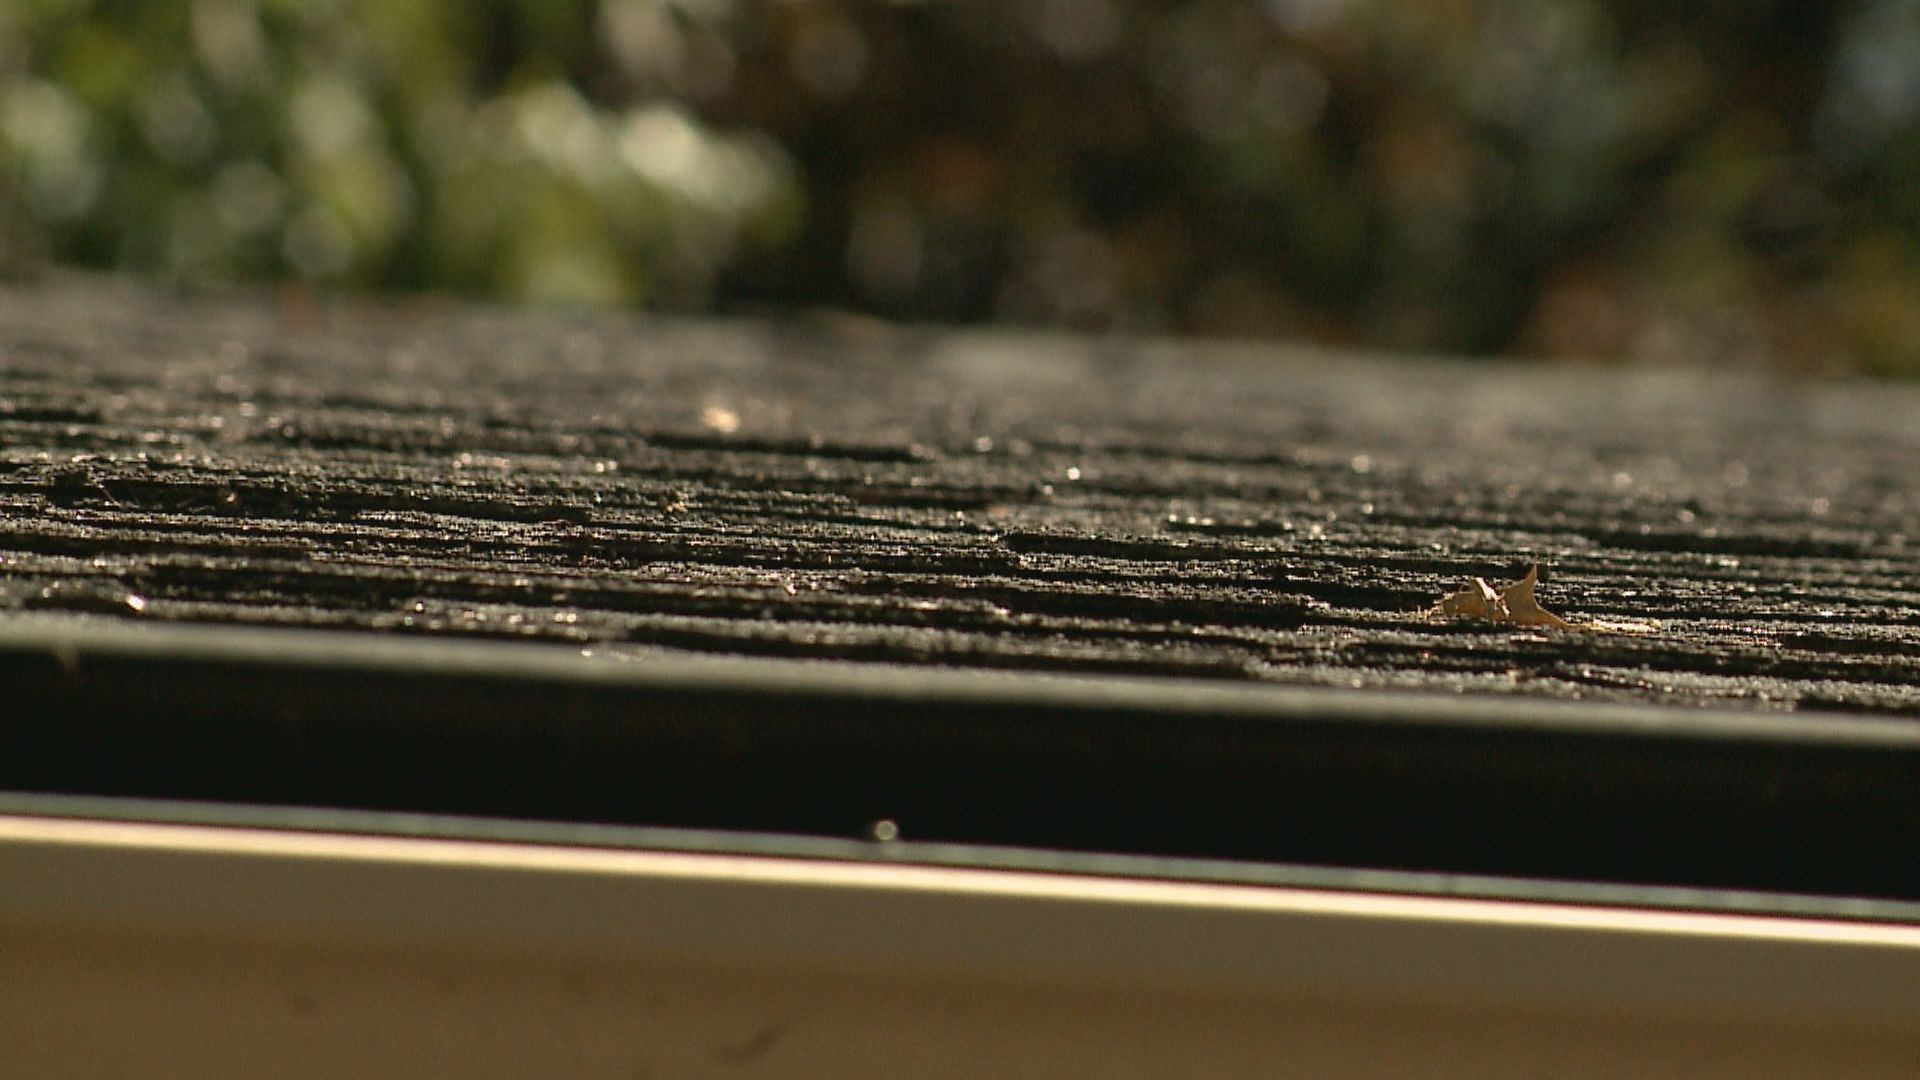 One Golden Valley resident told KARE 11 that nine different roofing contractors knocked on his door after a recent storm.